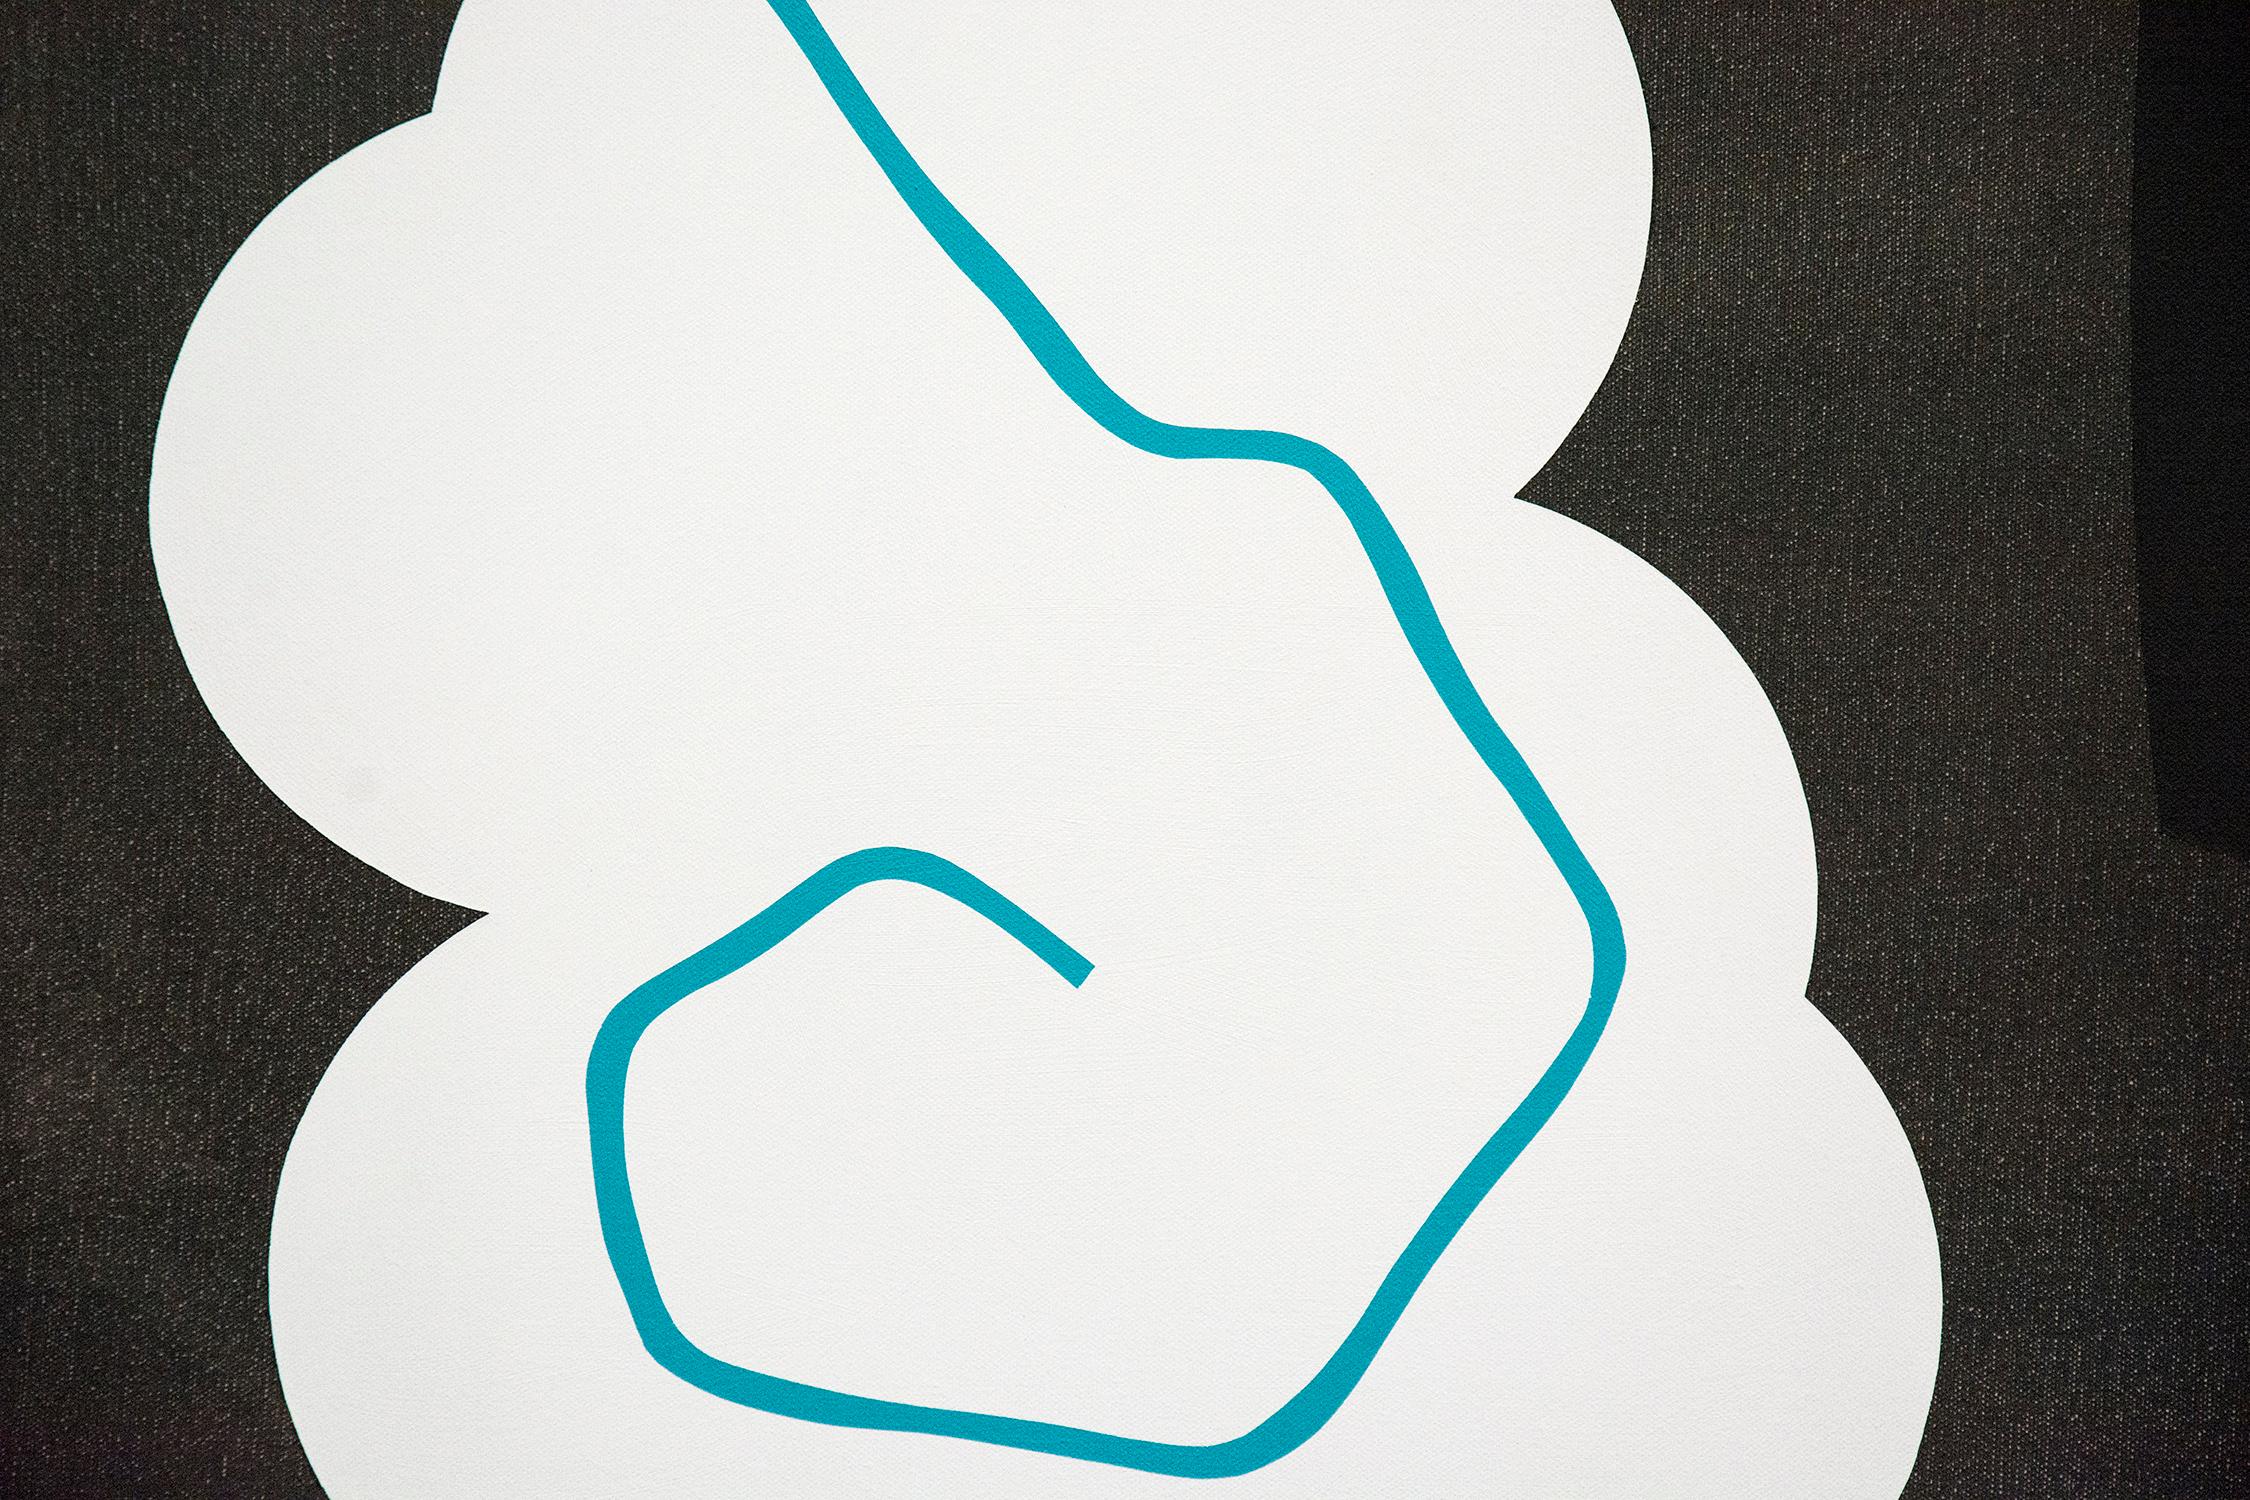 Black Painting with White Cloud - playful intersecting abstract shapes on canvas For Sale 3